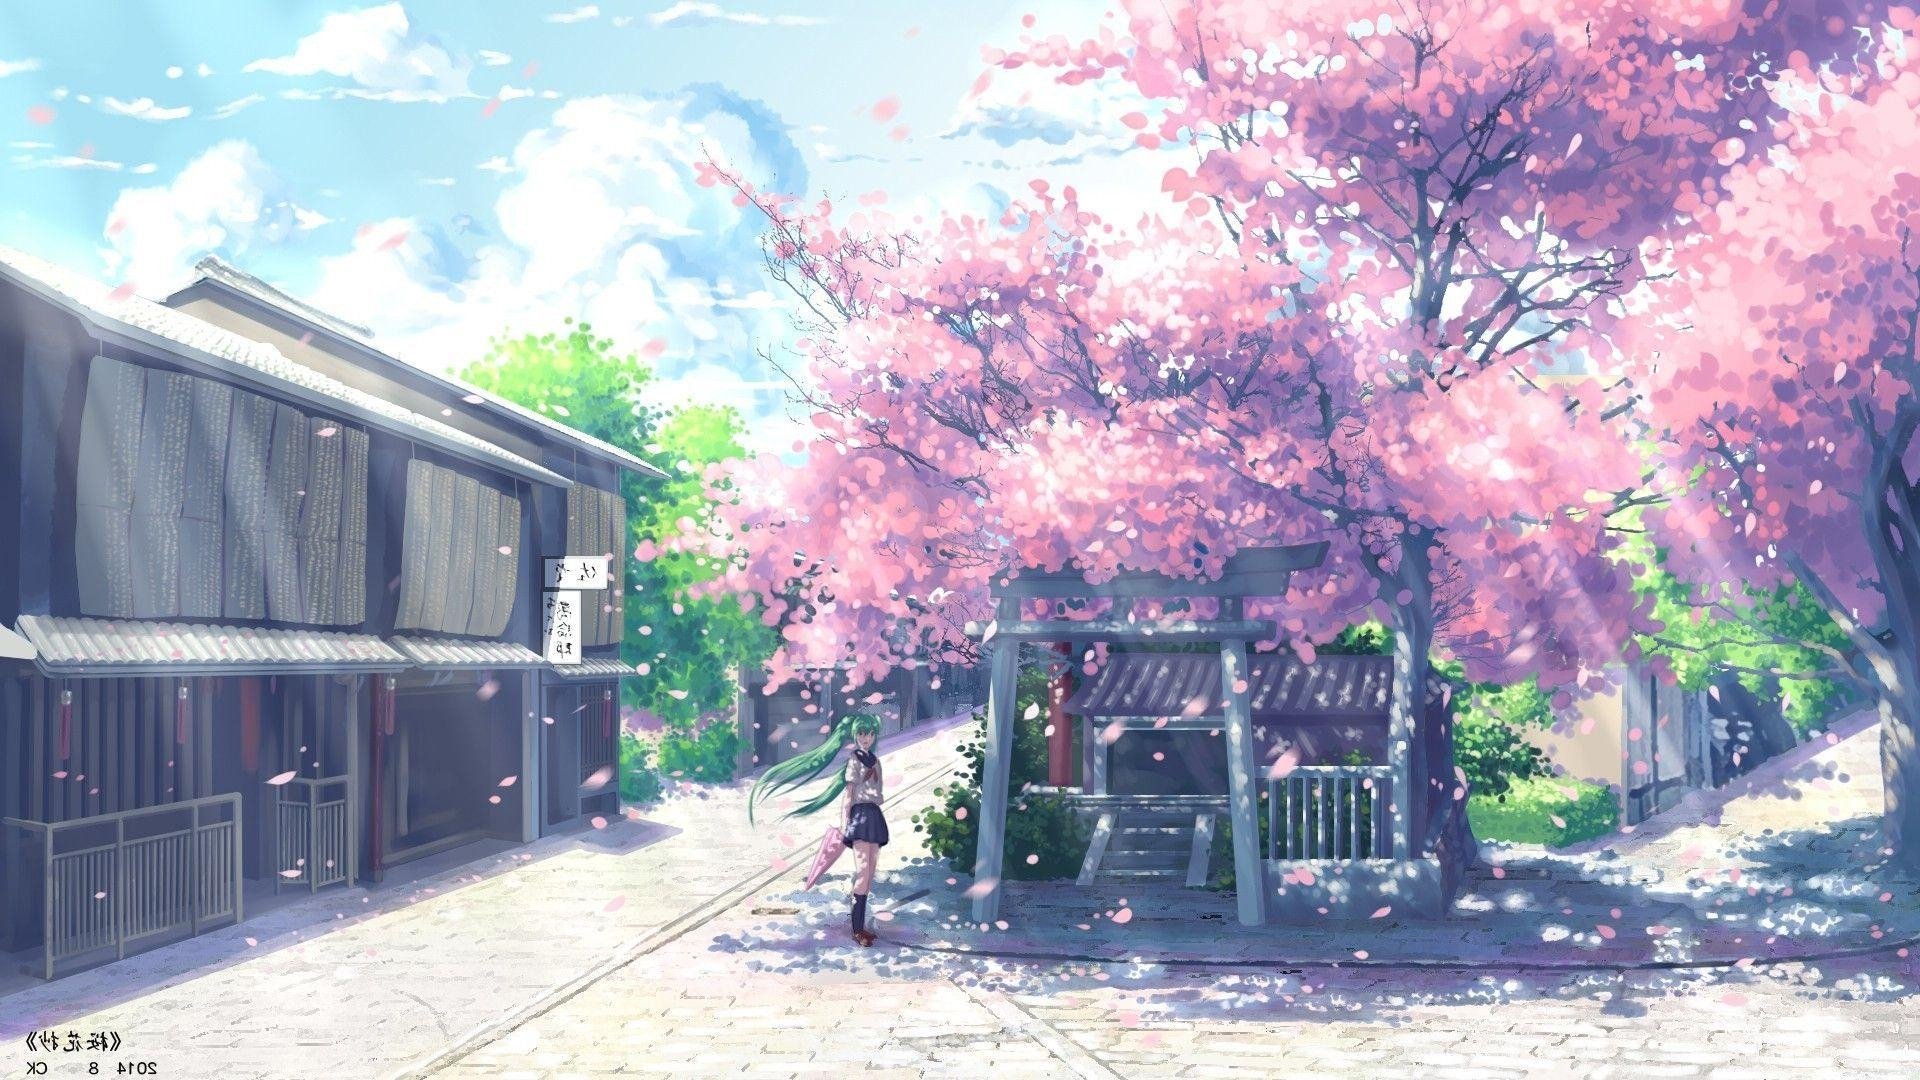 460982 sky, bench, artwork, outdoors, clouds, anime, sign - Rare Gallery HD  Wallpapers